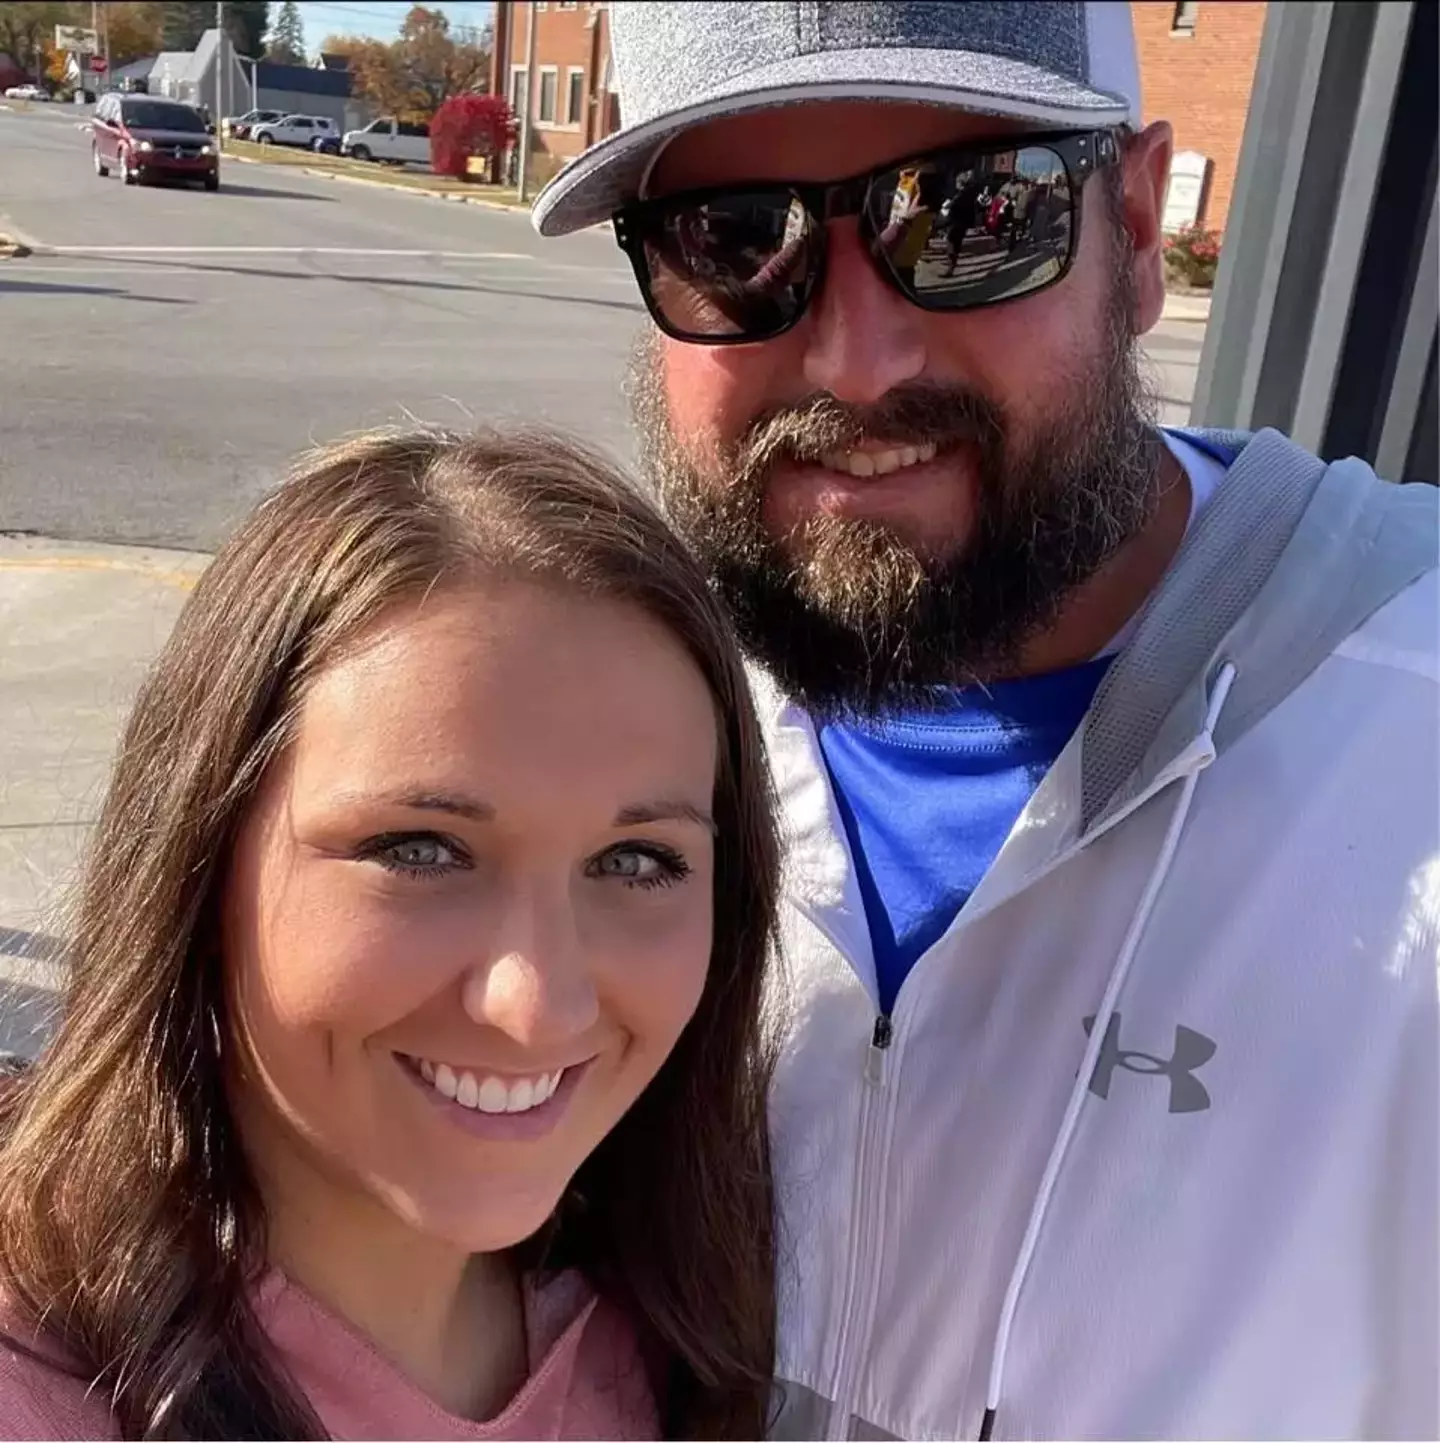 Ashley’s husband Cody performed CPR after his wife collapsed.